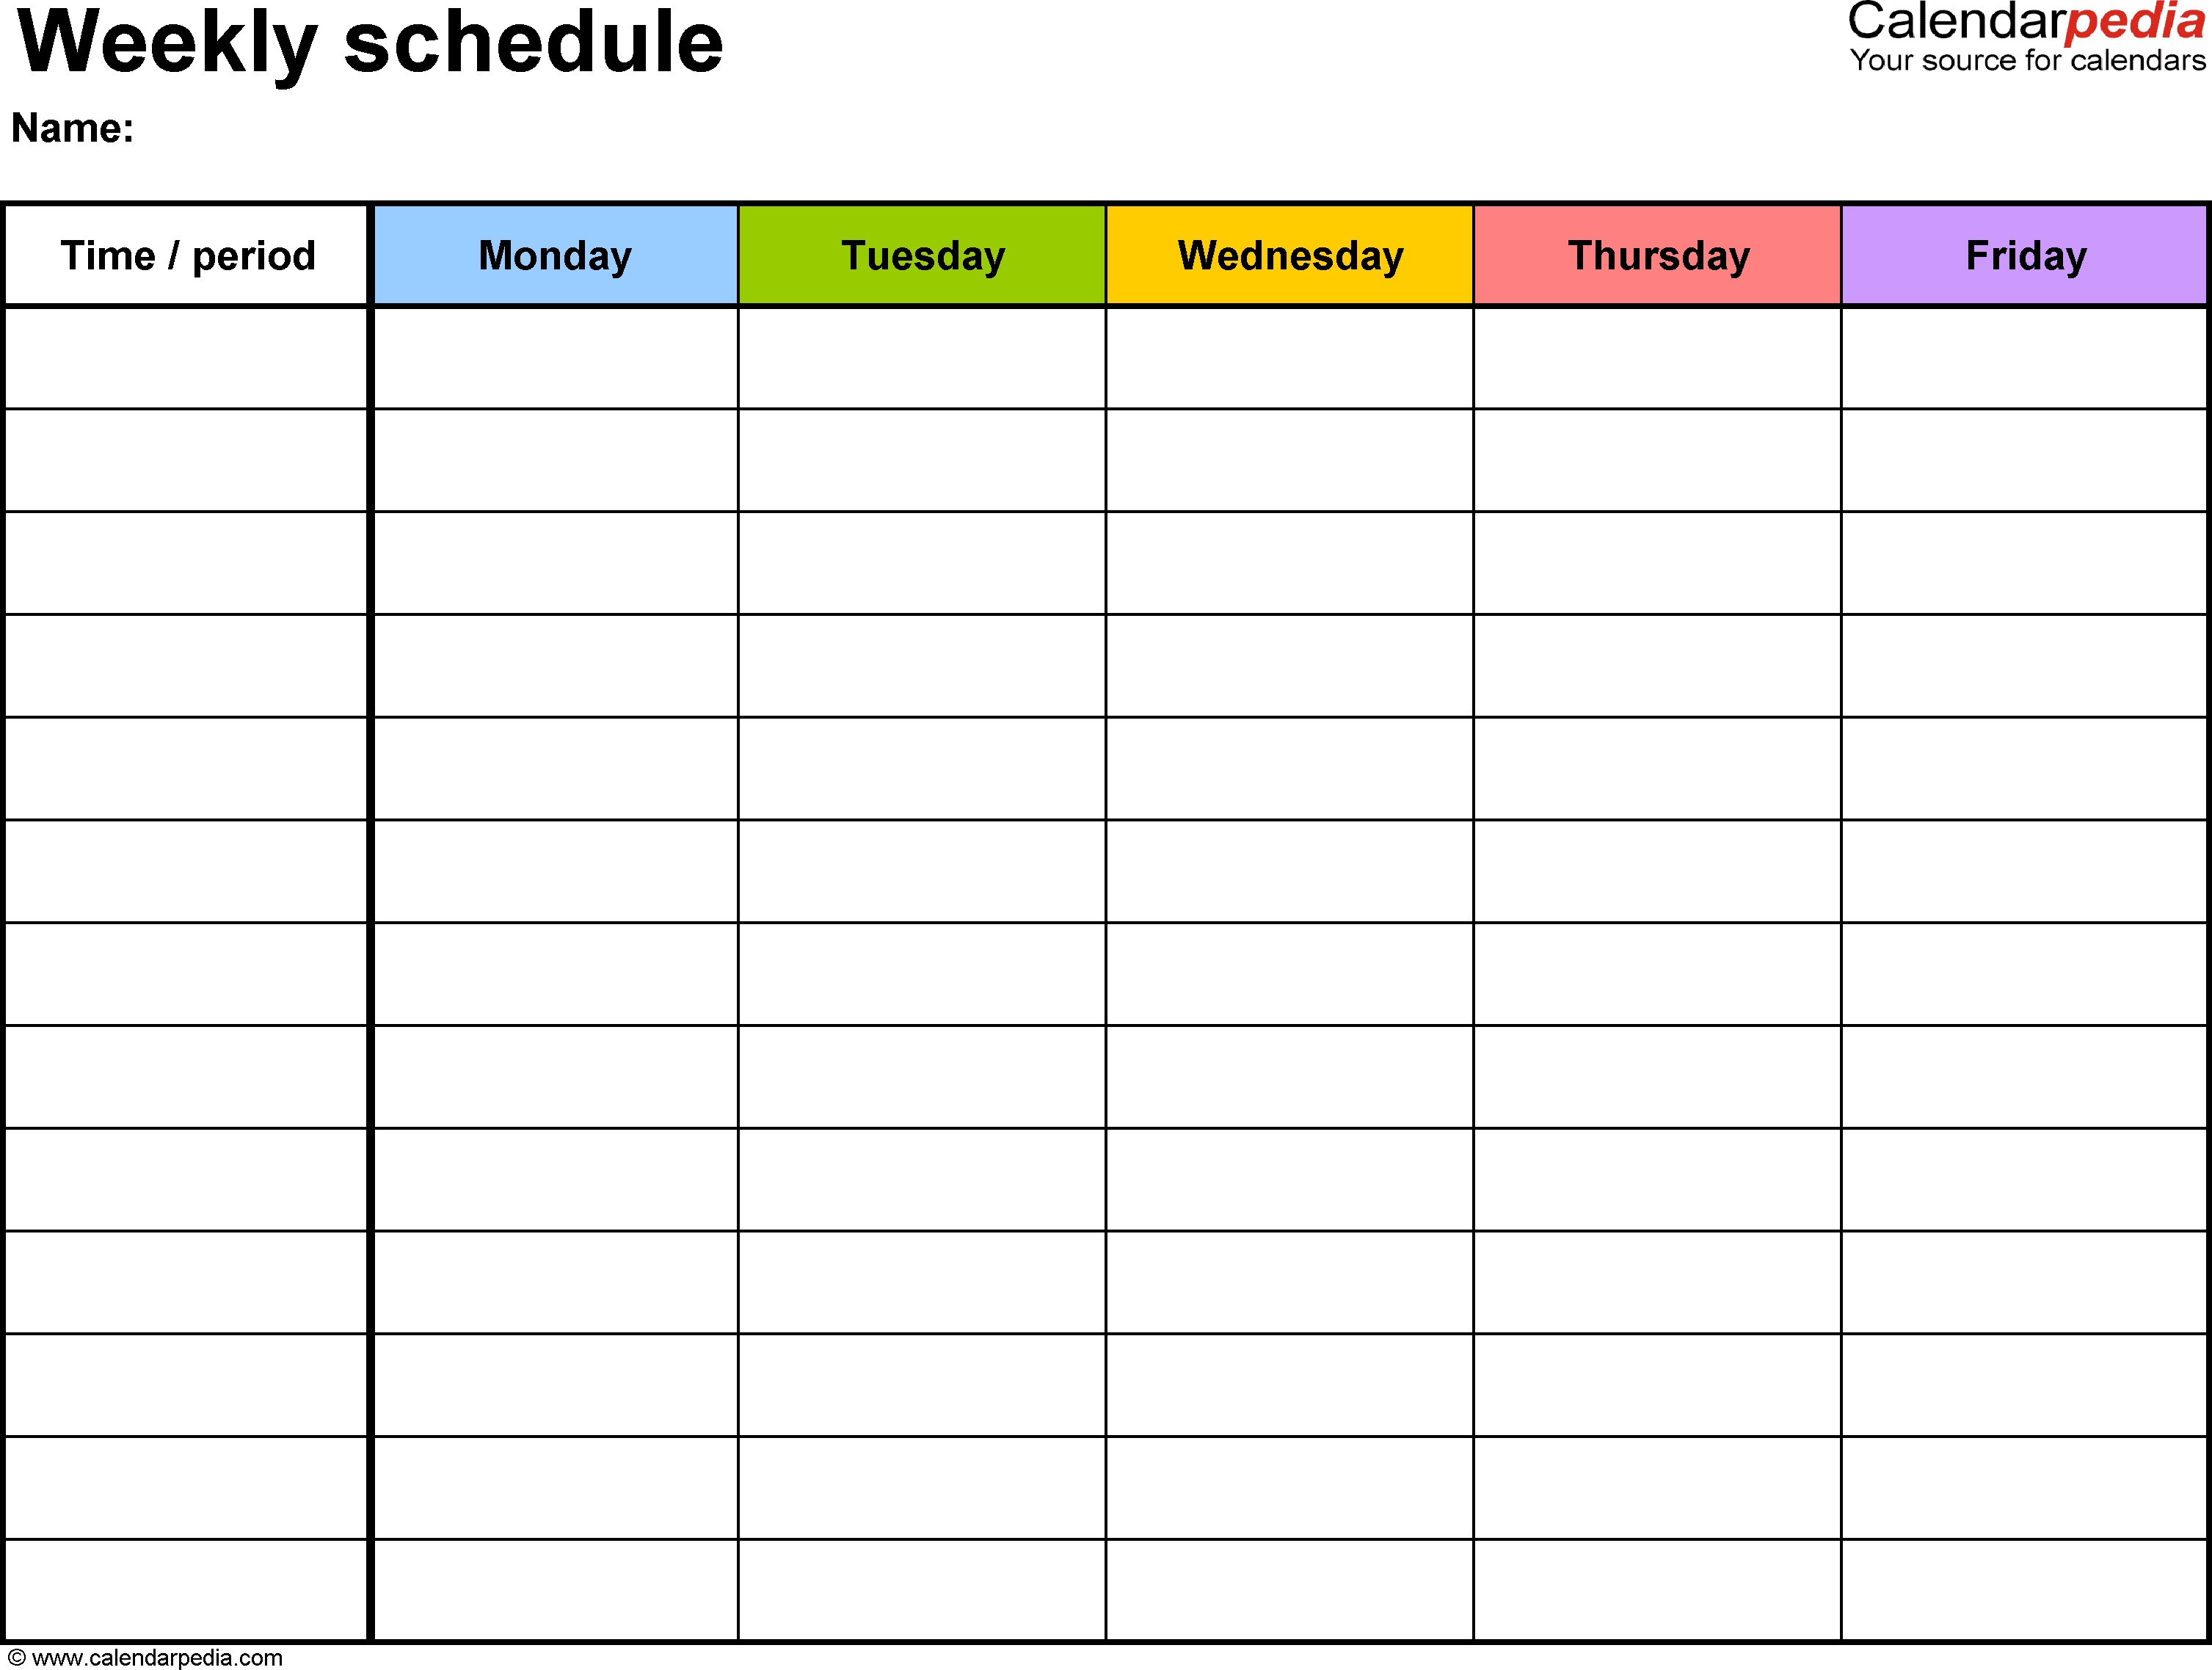 Free Weekly Schedule Templates For Word - 18 Templates intended for 5 Day Blank Calendar Printable